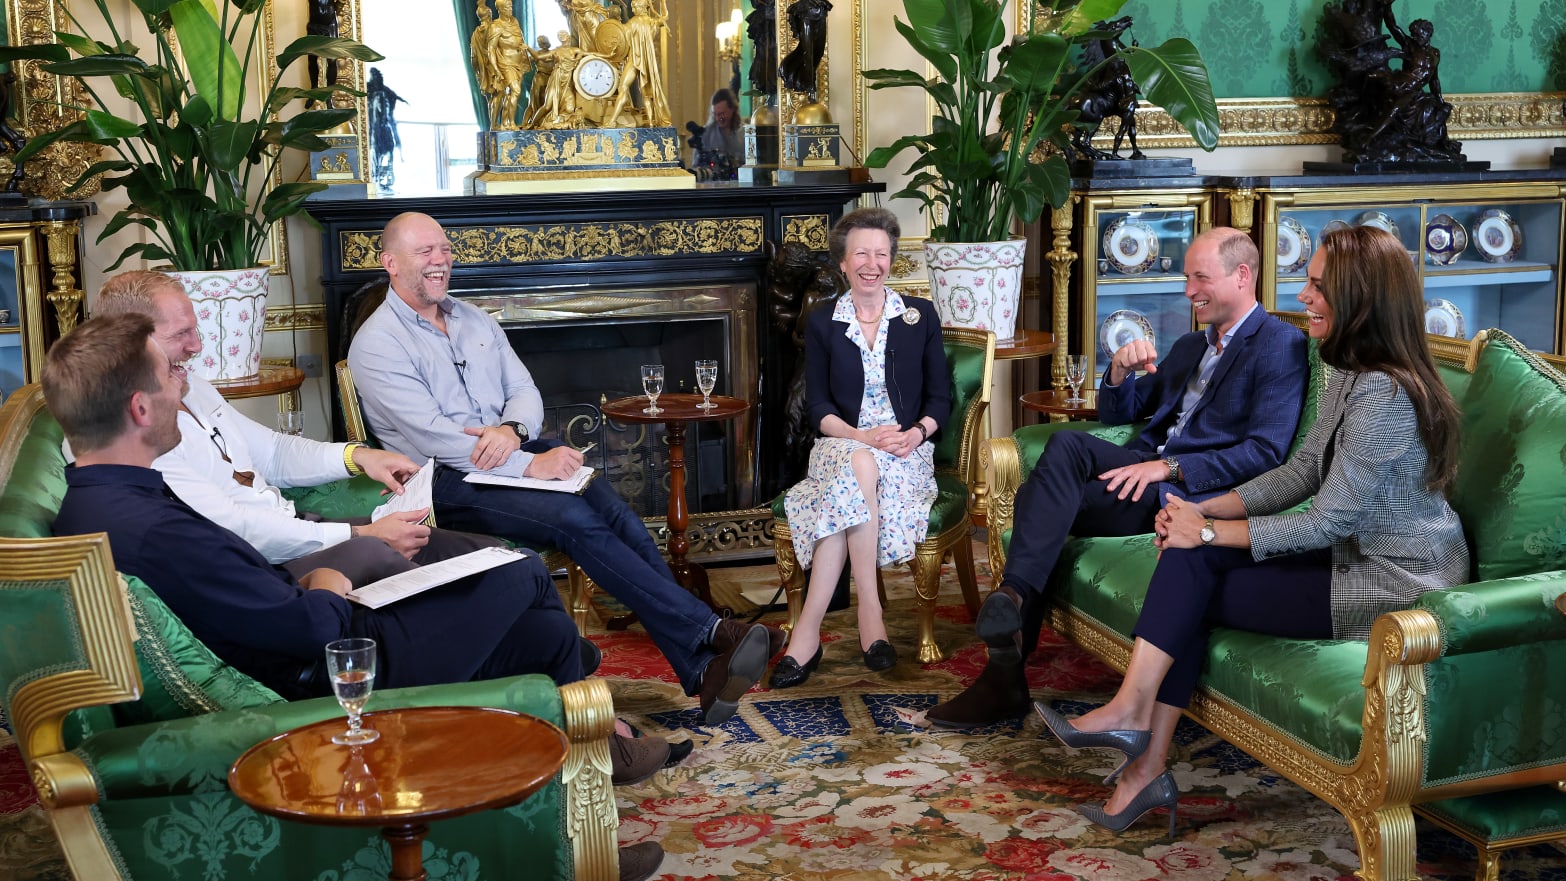 Mike Tindall, Princess Anne, Princess Royal, Prince William, Prince of Wales and Catherine, Princess of Wales attend the recording of a special episode of The Good, The Bad and The Rugby podcast, in the Green Drawing Room at Windsor Castle.